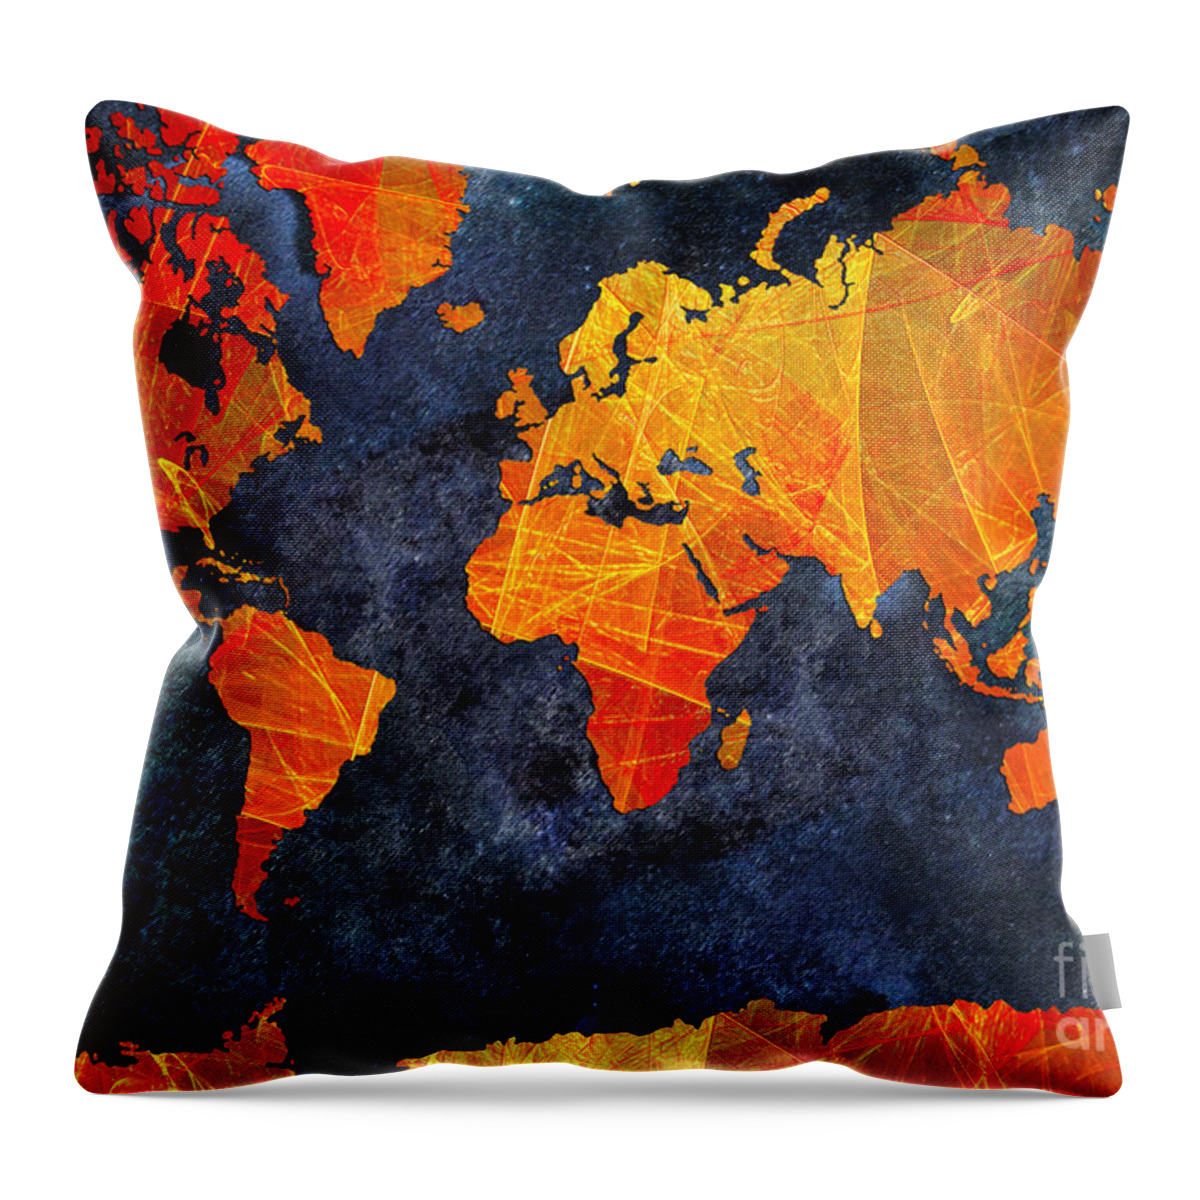 Abstract Throw Pillow featuring the digital art World Map - Elegance Of The Sun - Fractal - Abstract - Digital Art 2 by Andee Design